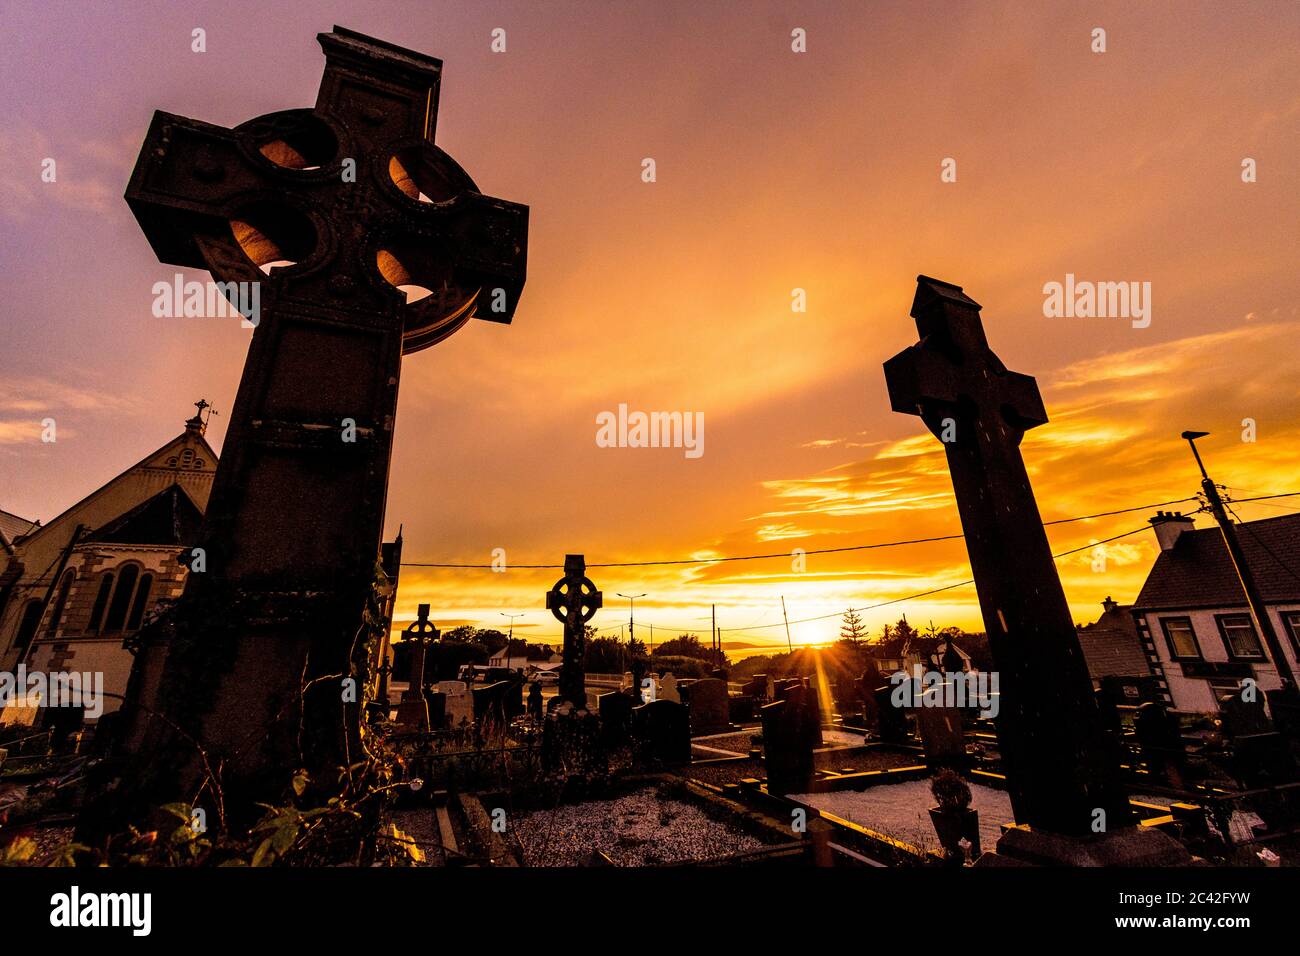 Ardara, County Donegal, Ireland weather. 23rd June 2020. A spectacular sunset over the graveyard of the Church of the Holy Family on the west coast. The weather had been changable all day with some heavy rainfall. Stock Photo